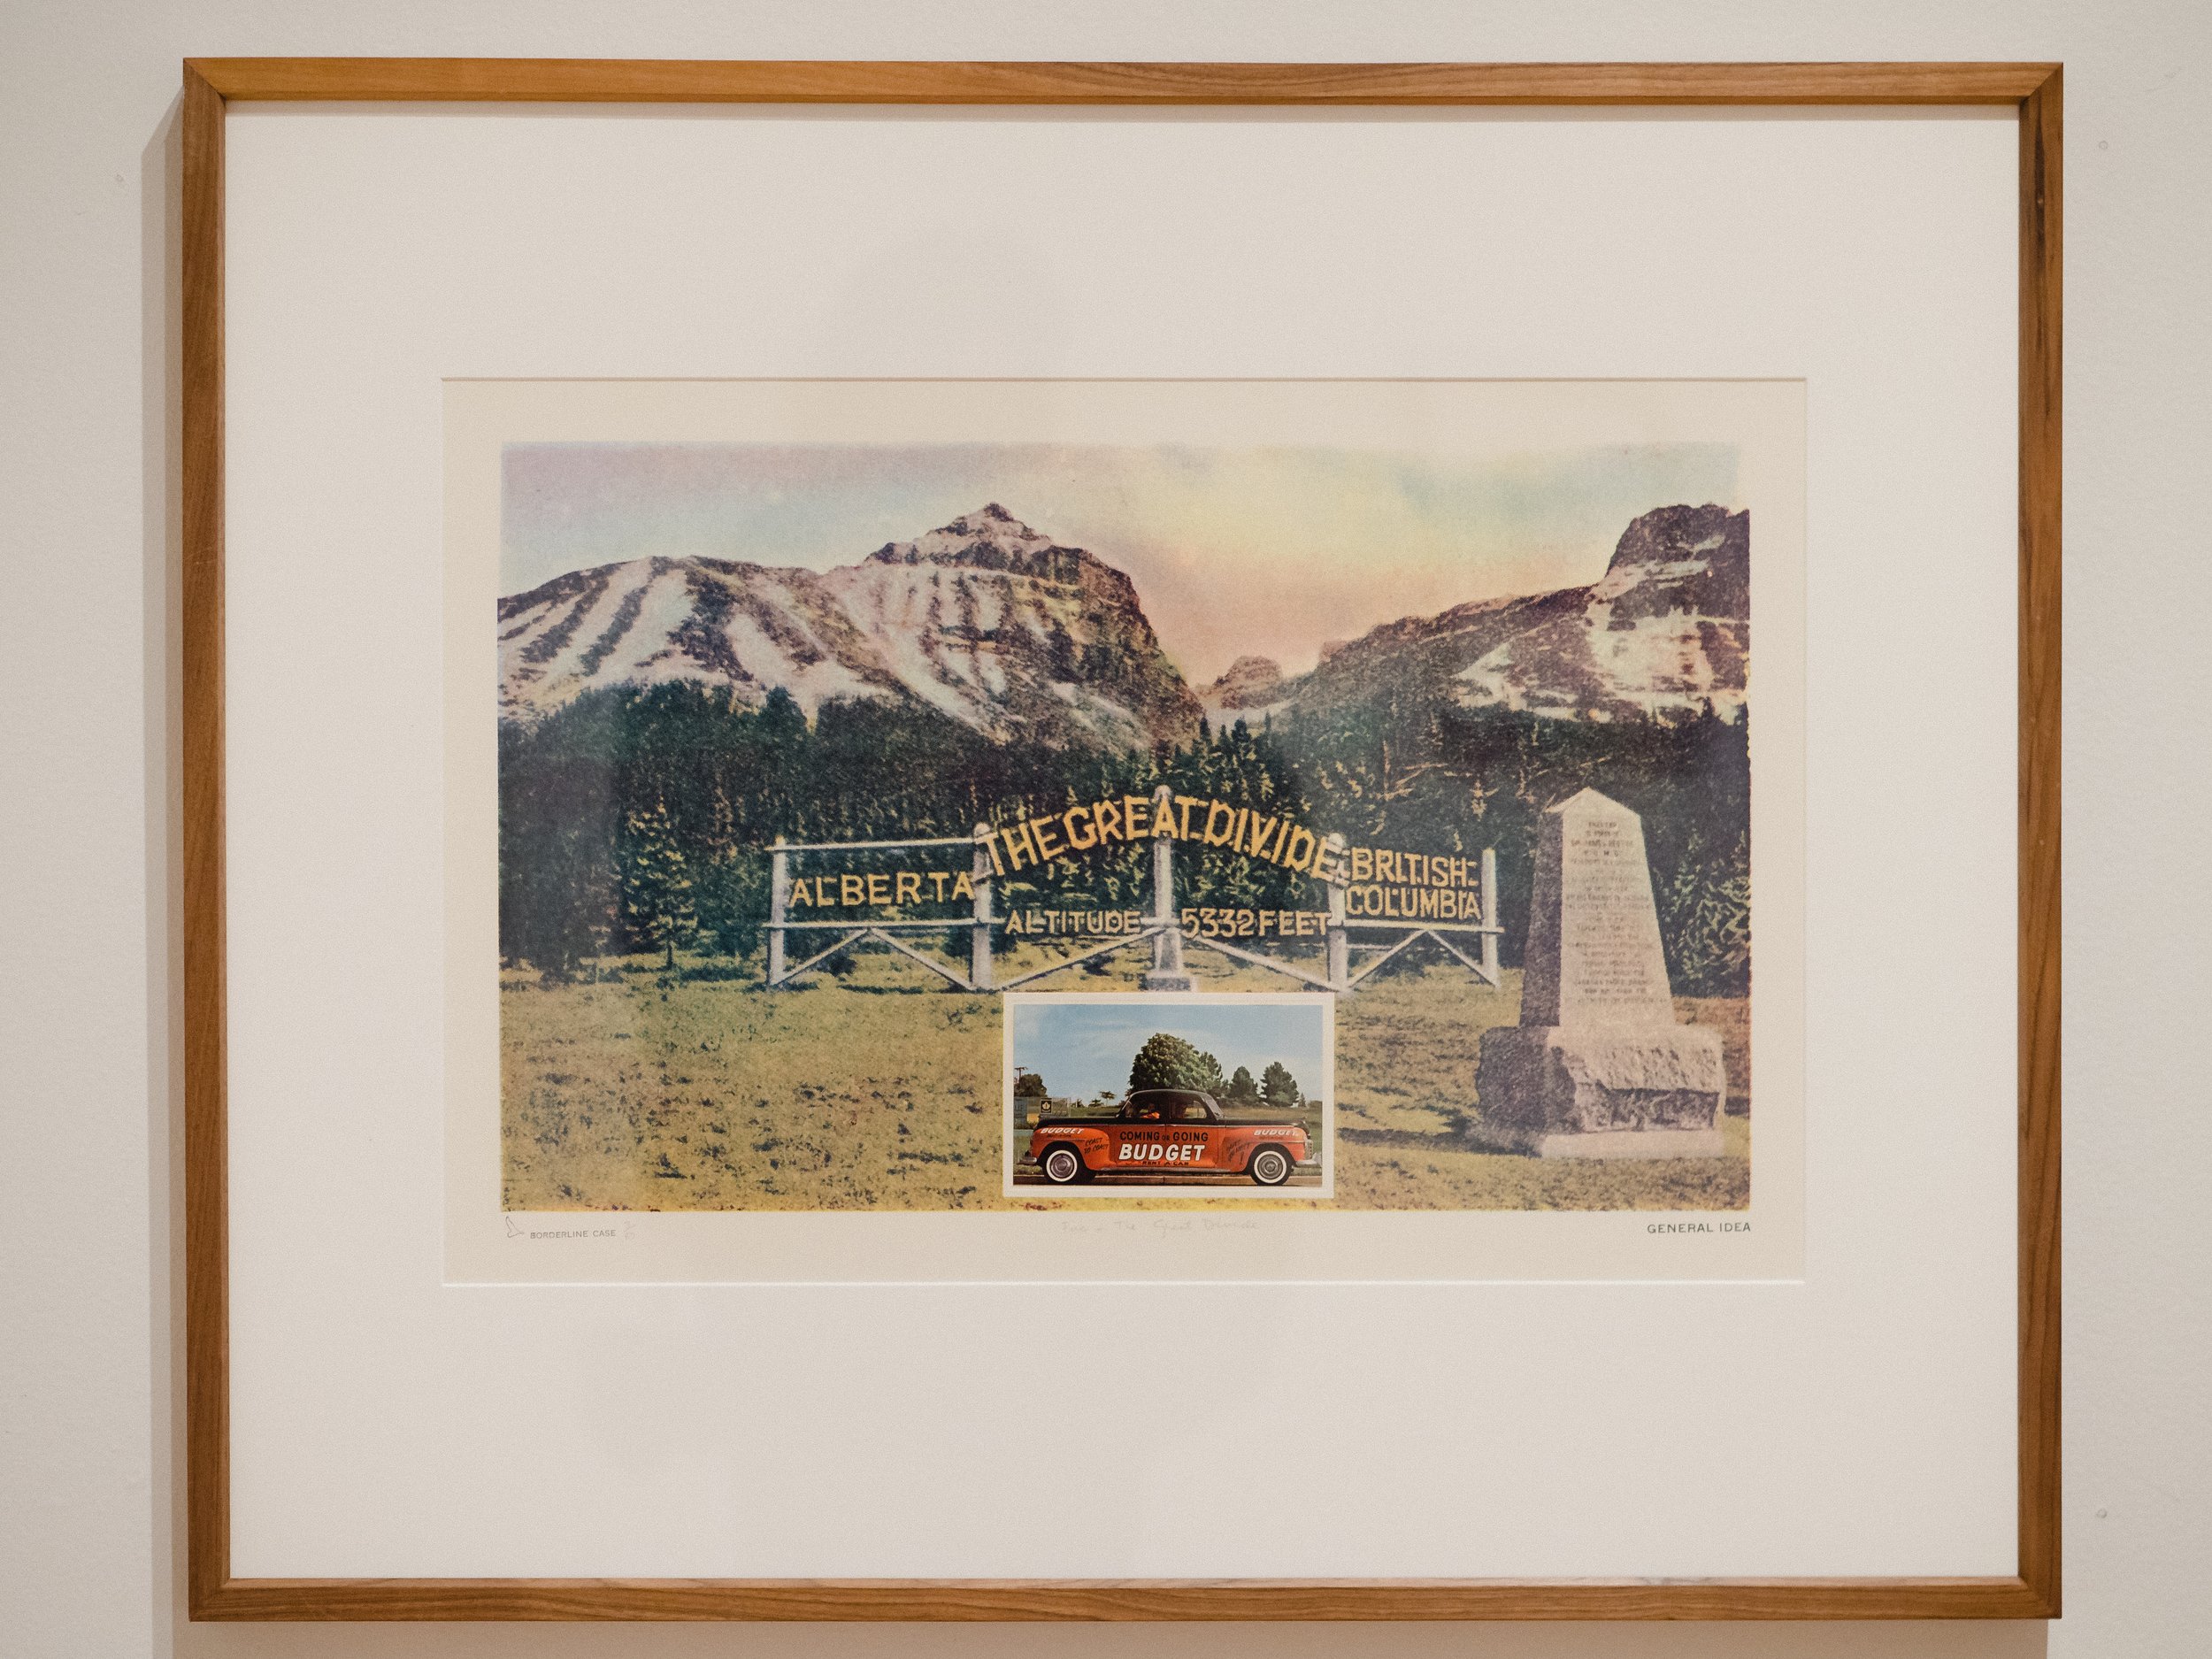 General Idea, Borderline Case: Five – The Great Divide, 1972, screenprint on paper with postcard applique, 3/80, Purchase, Chancellor Richardson Memorial Fund, 2003. Photo: Tim Forbes